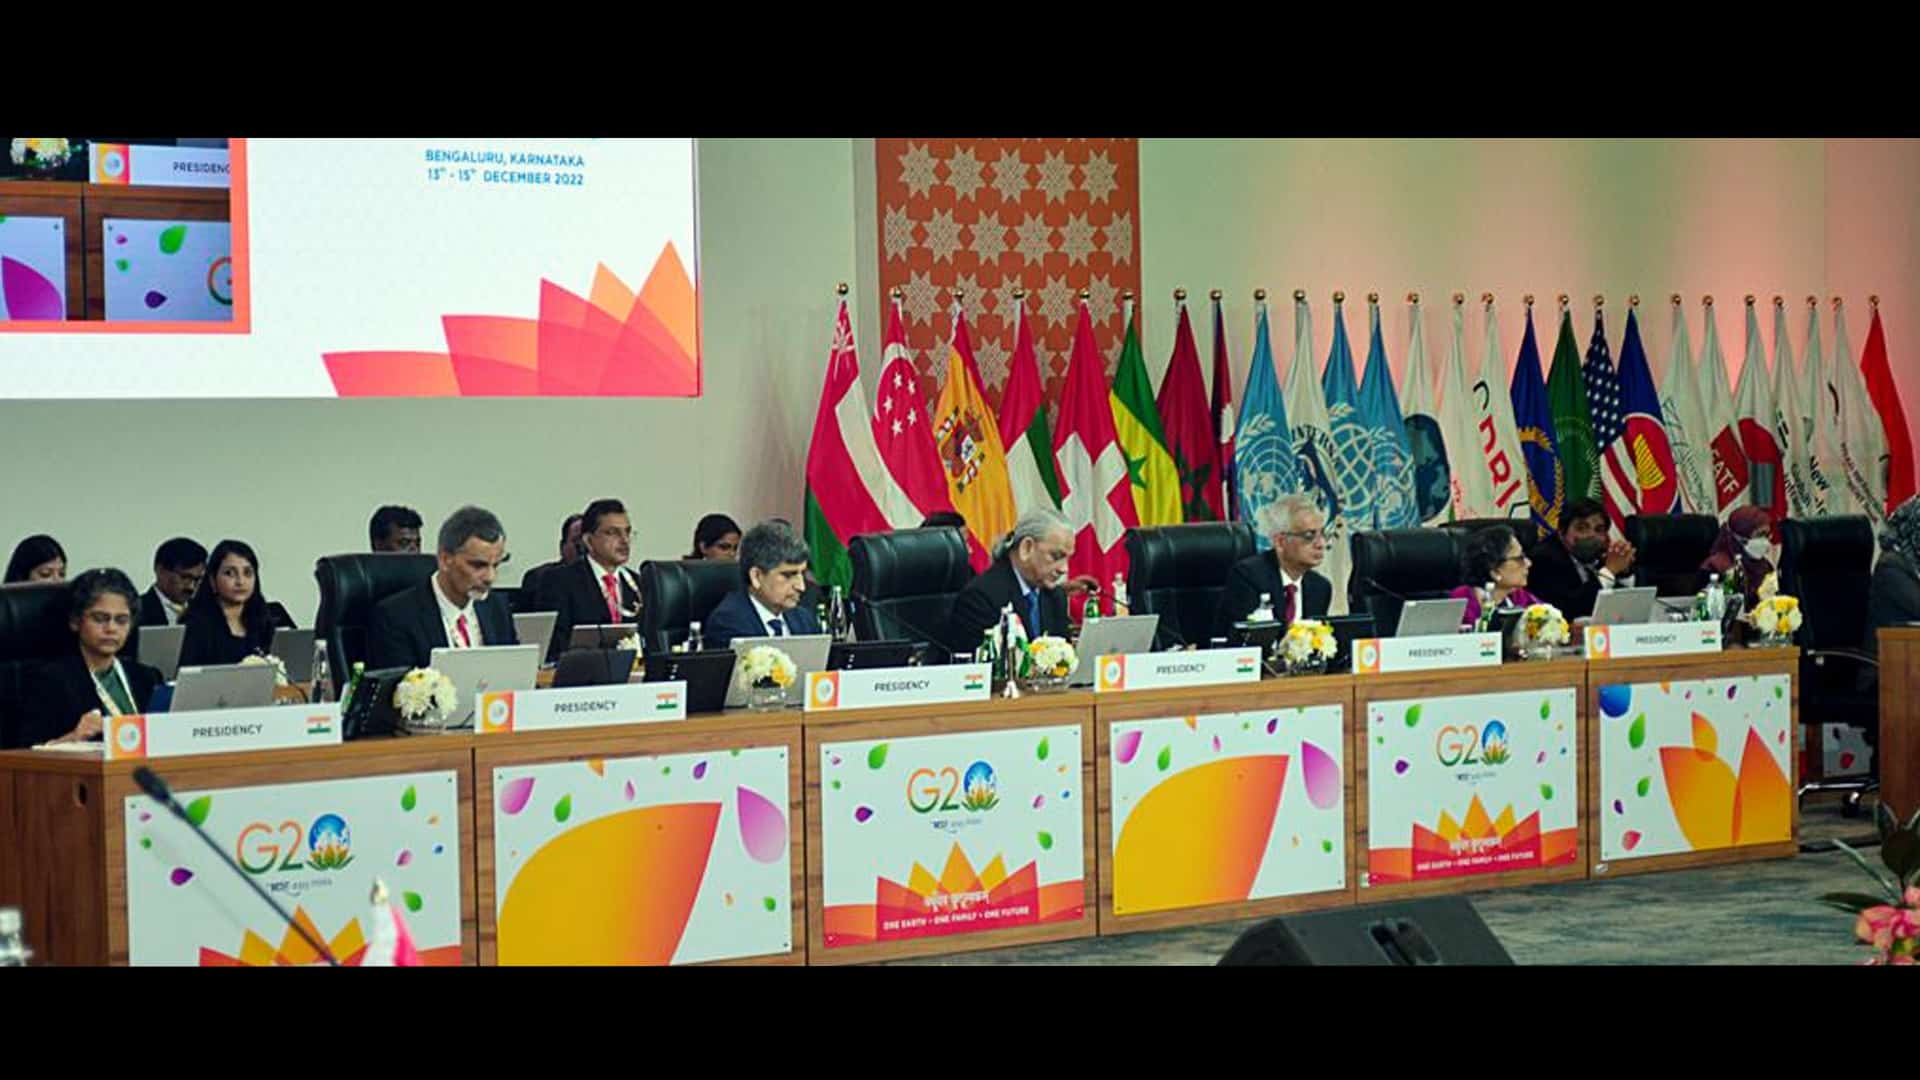 G20 second Framework Working Group meeting to discuss global macro-economic issues: CEA